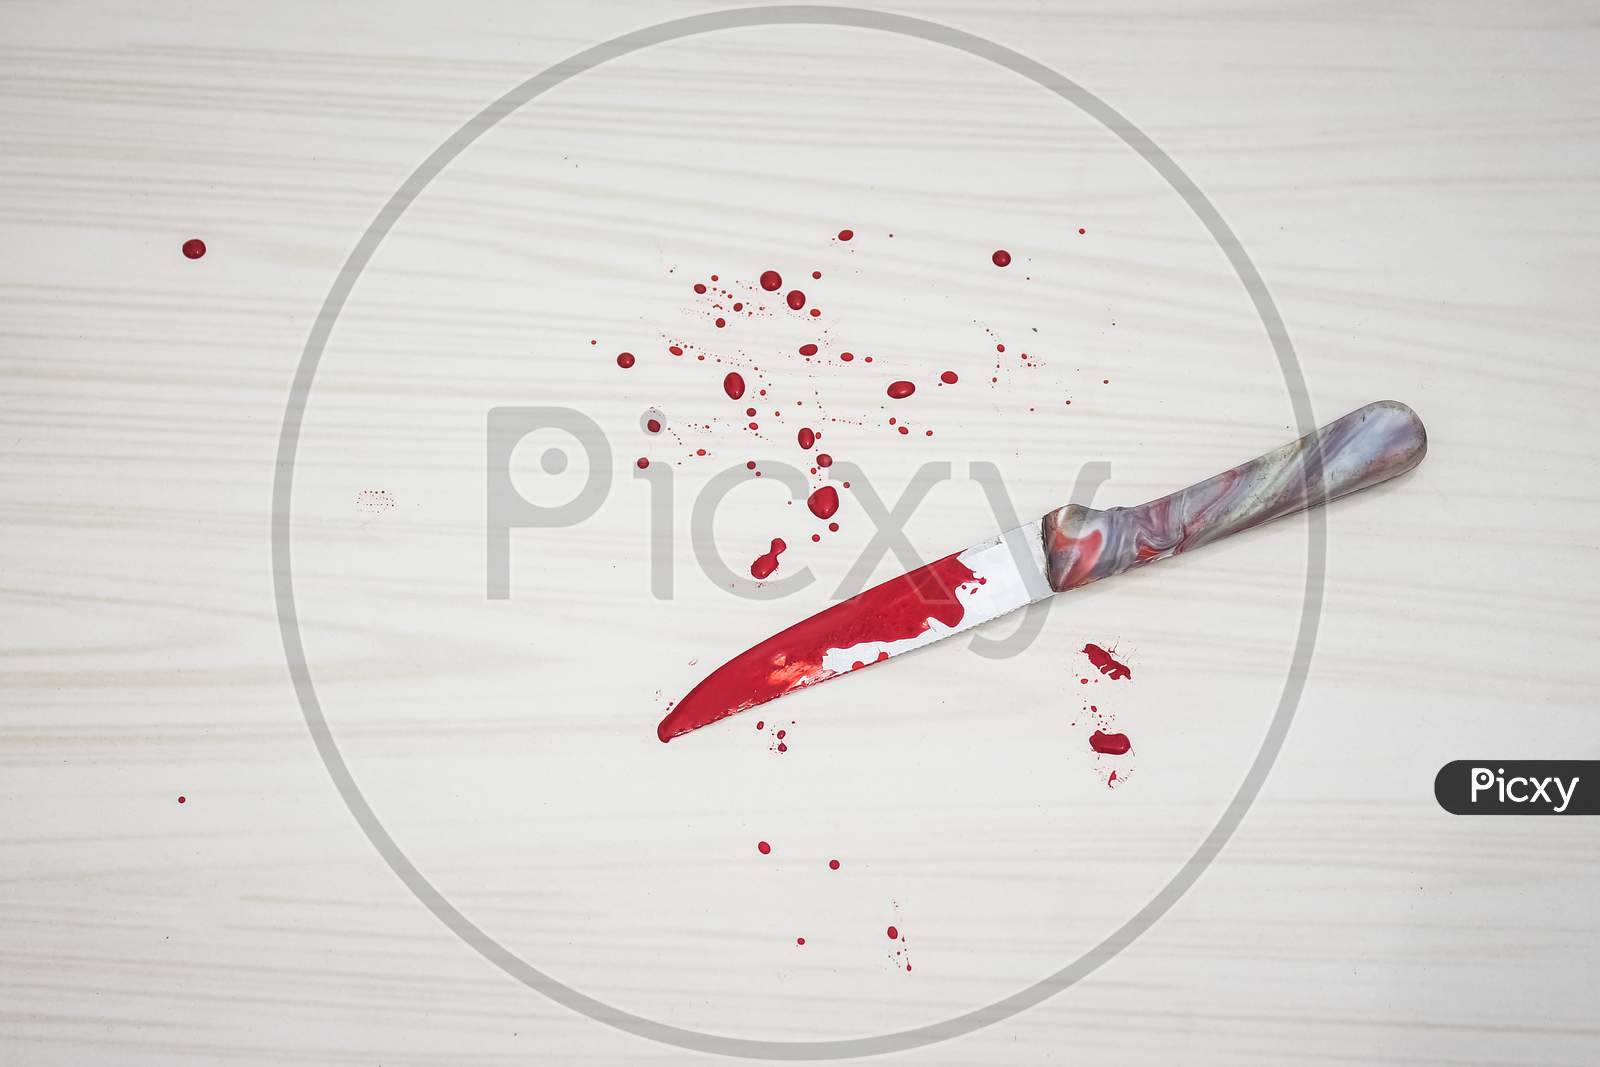 Bloody knife on the floor. knife was found at the scene of the crime. A forensic takes blood samples from the knife. Bloody knife lies on ceramic tiles background. Concept of a domestic killings.